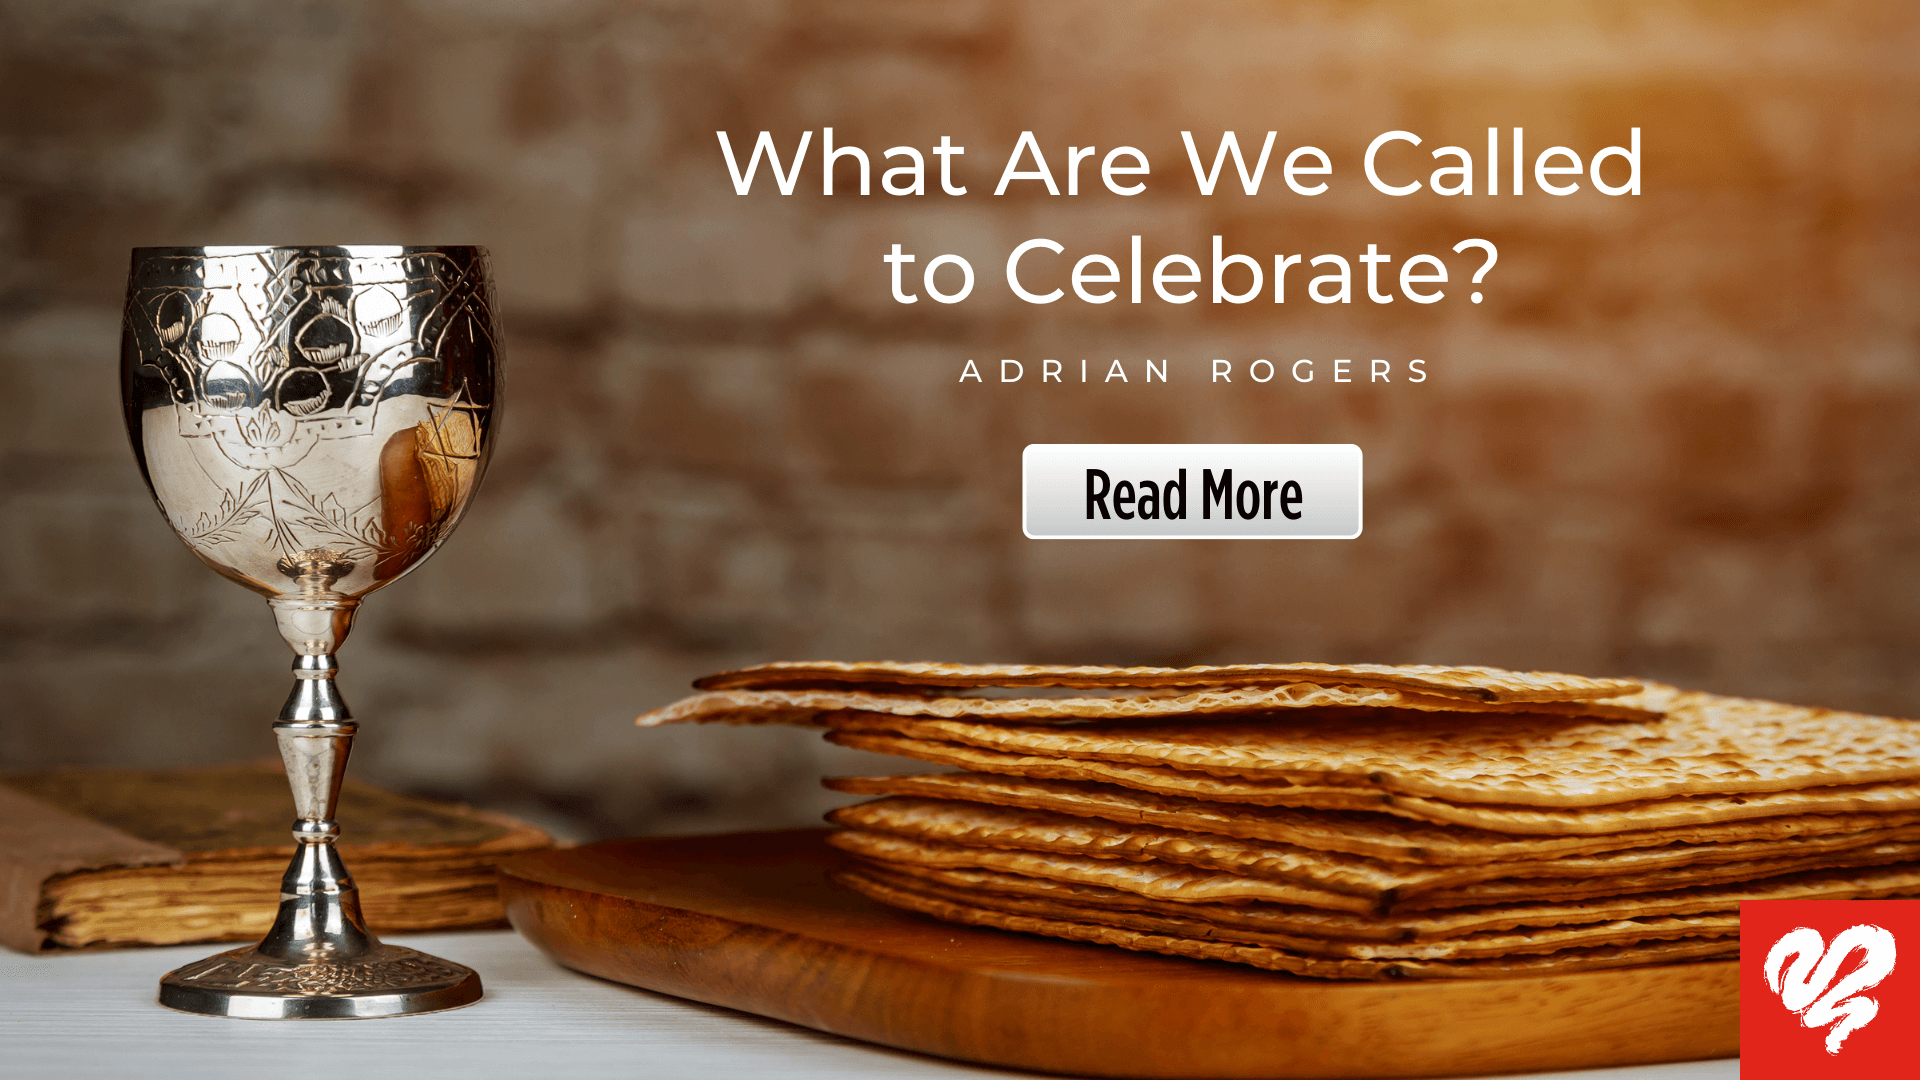 What Are We Called to Celebrate 032821 1920x1080